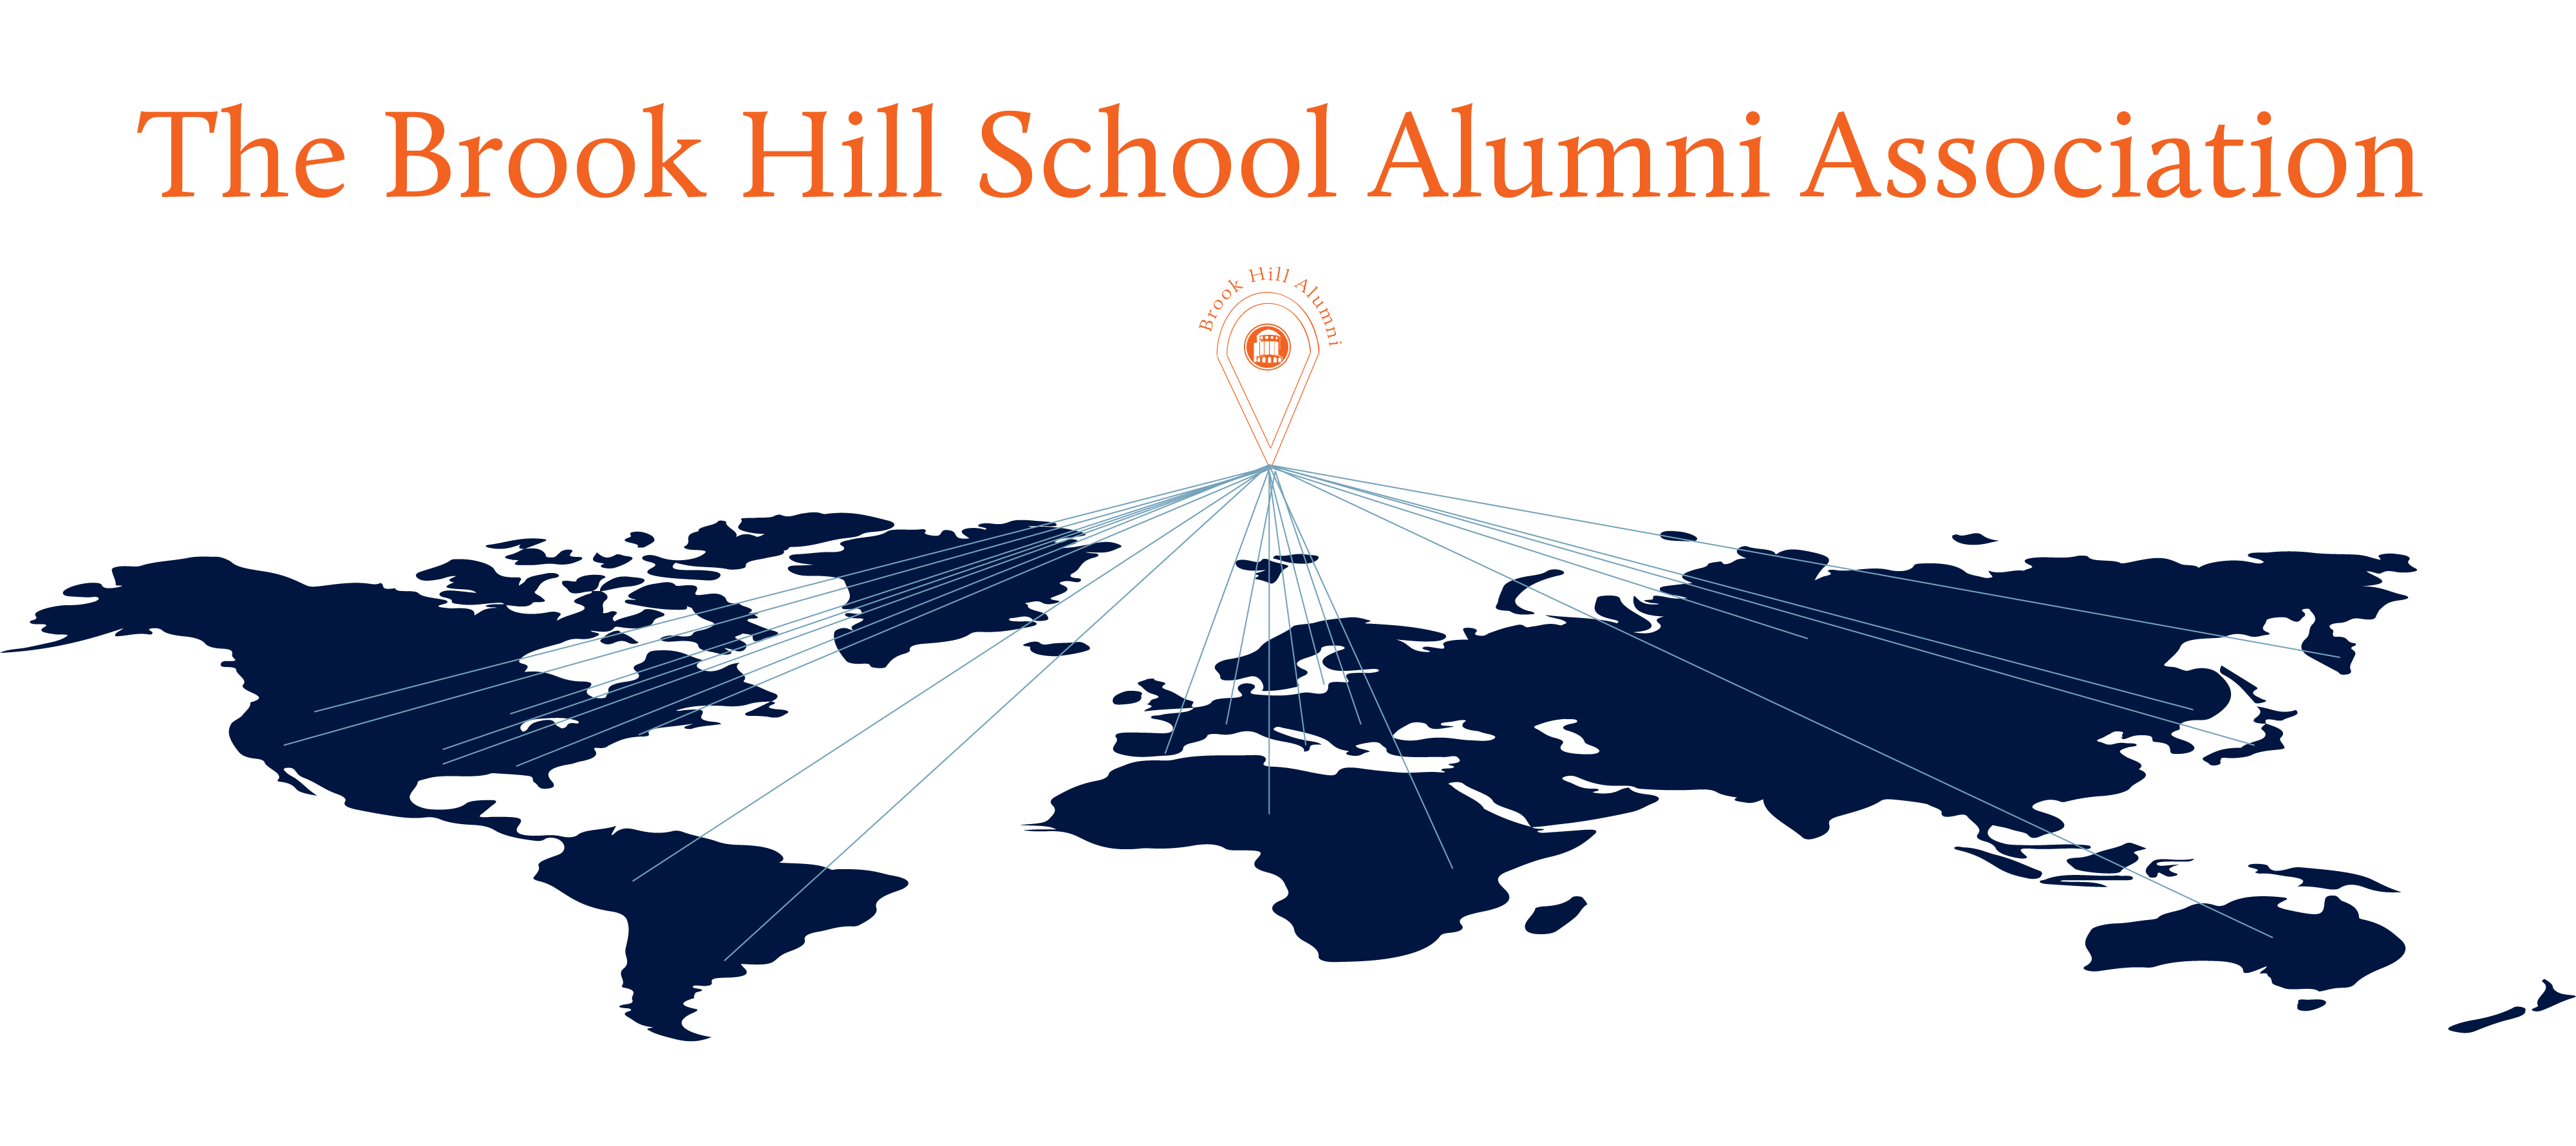 Office 365 - The Brook Hill School